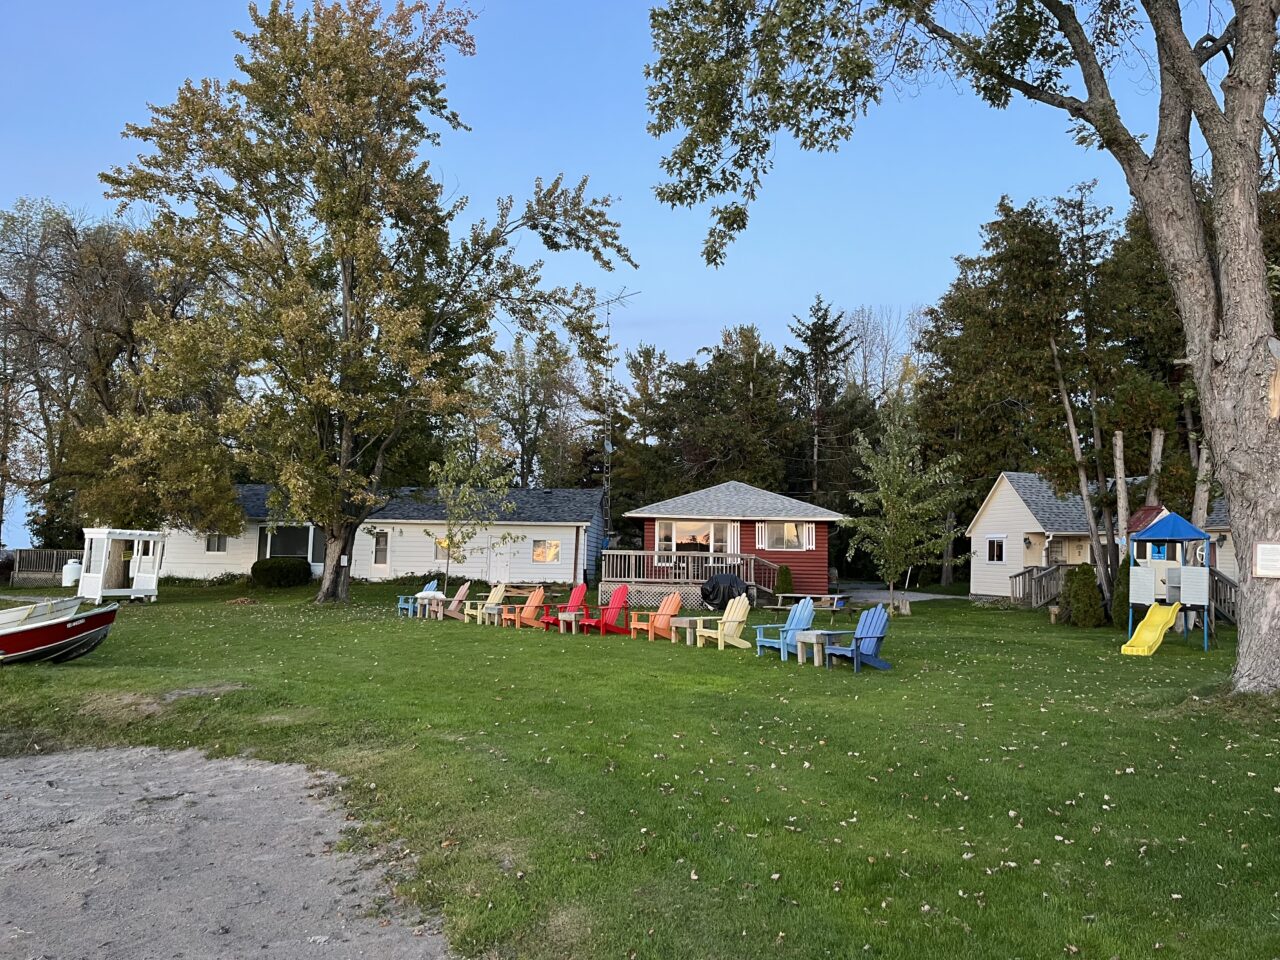 View from waterfront looking towards Lakeside Cottages, with a lineup of multi-coloured Adirondack chairs